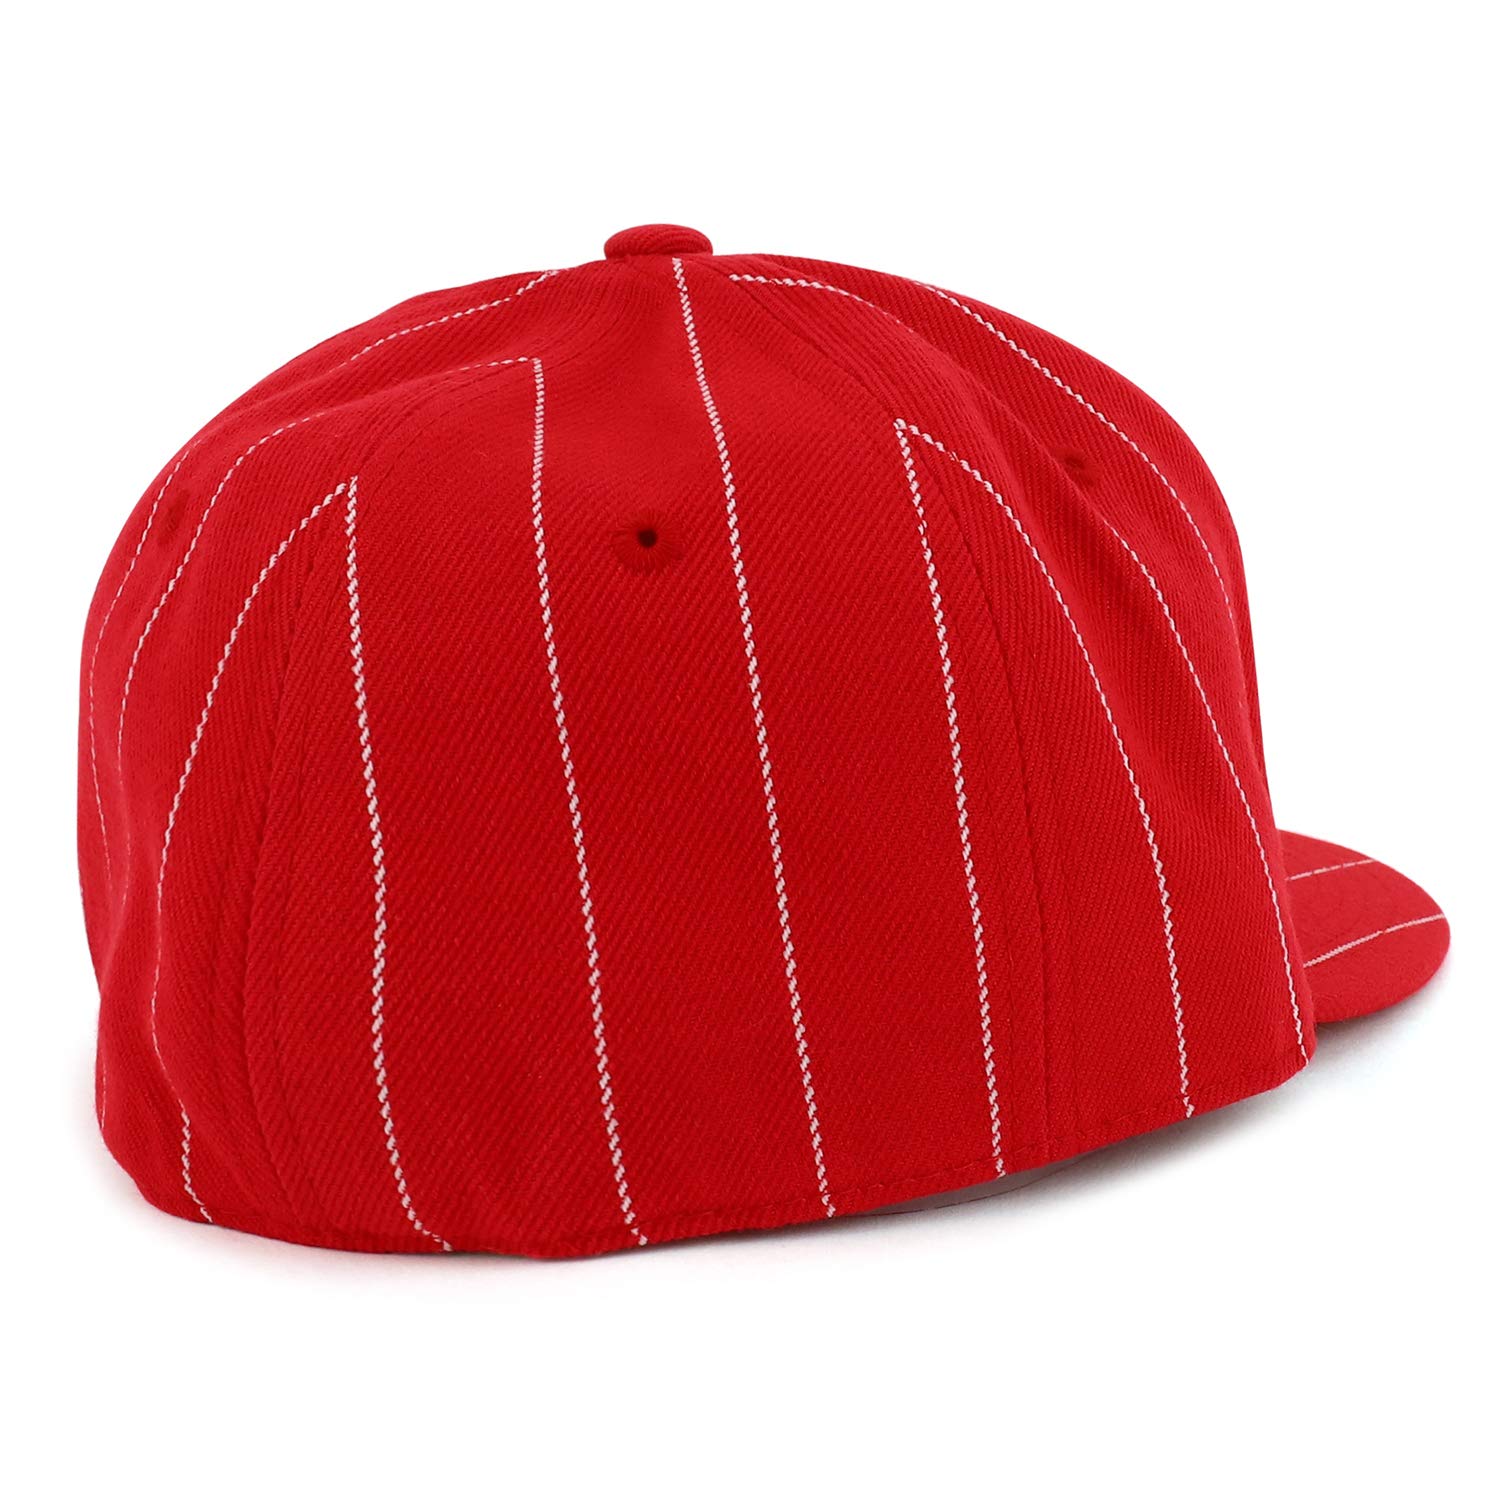 Armycrew Pin Striped Structured Flatbill Fitted Baseball Cap - Red - 7 1/4